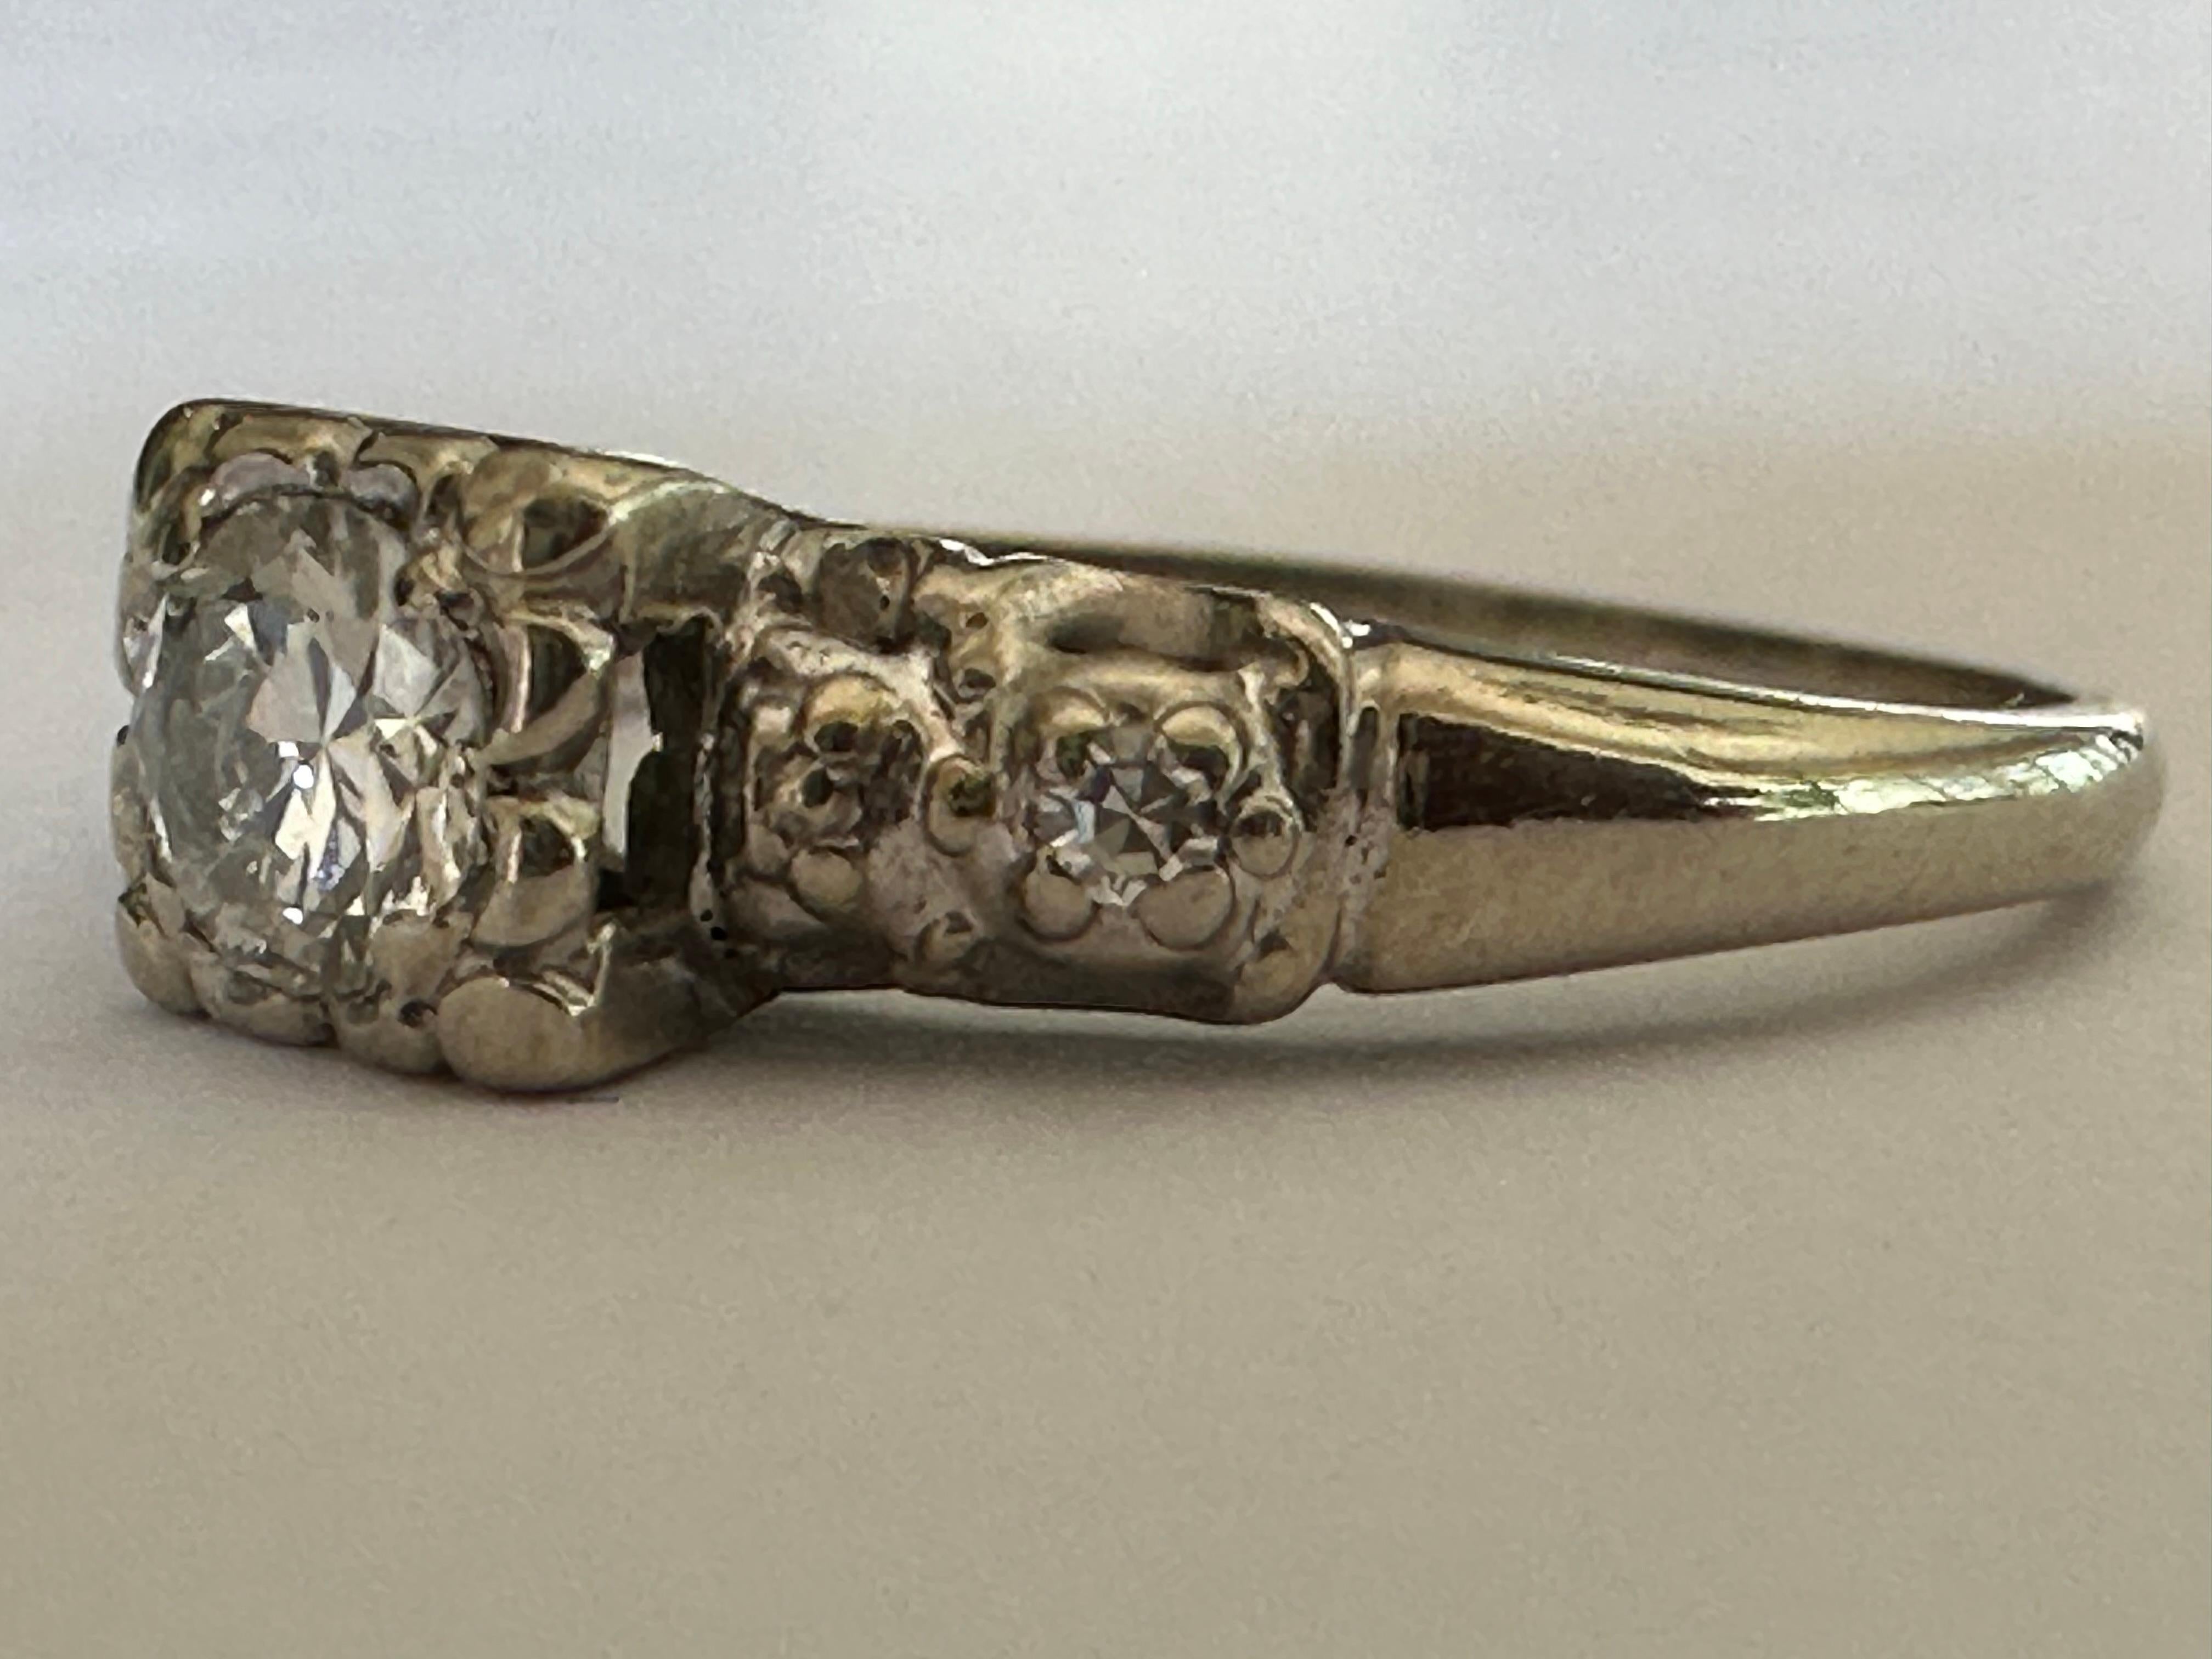 An Old European-cut diamond center stone measuring approximately 0.30 carat, F color VS clarity, shines in between finely engraved shoulders dotted with two tiny single cut diamonds. Set in 14K white gold. 
Maker's mark indicates it was most likely